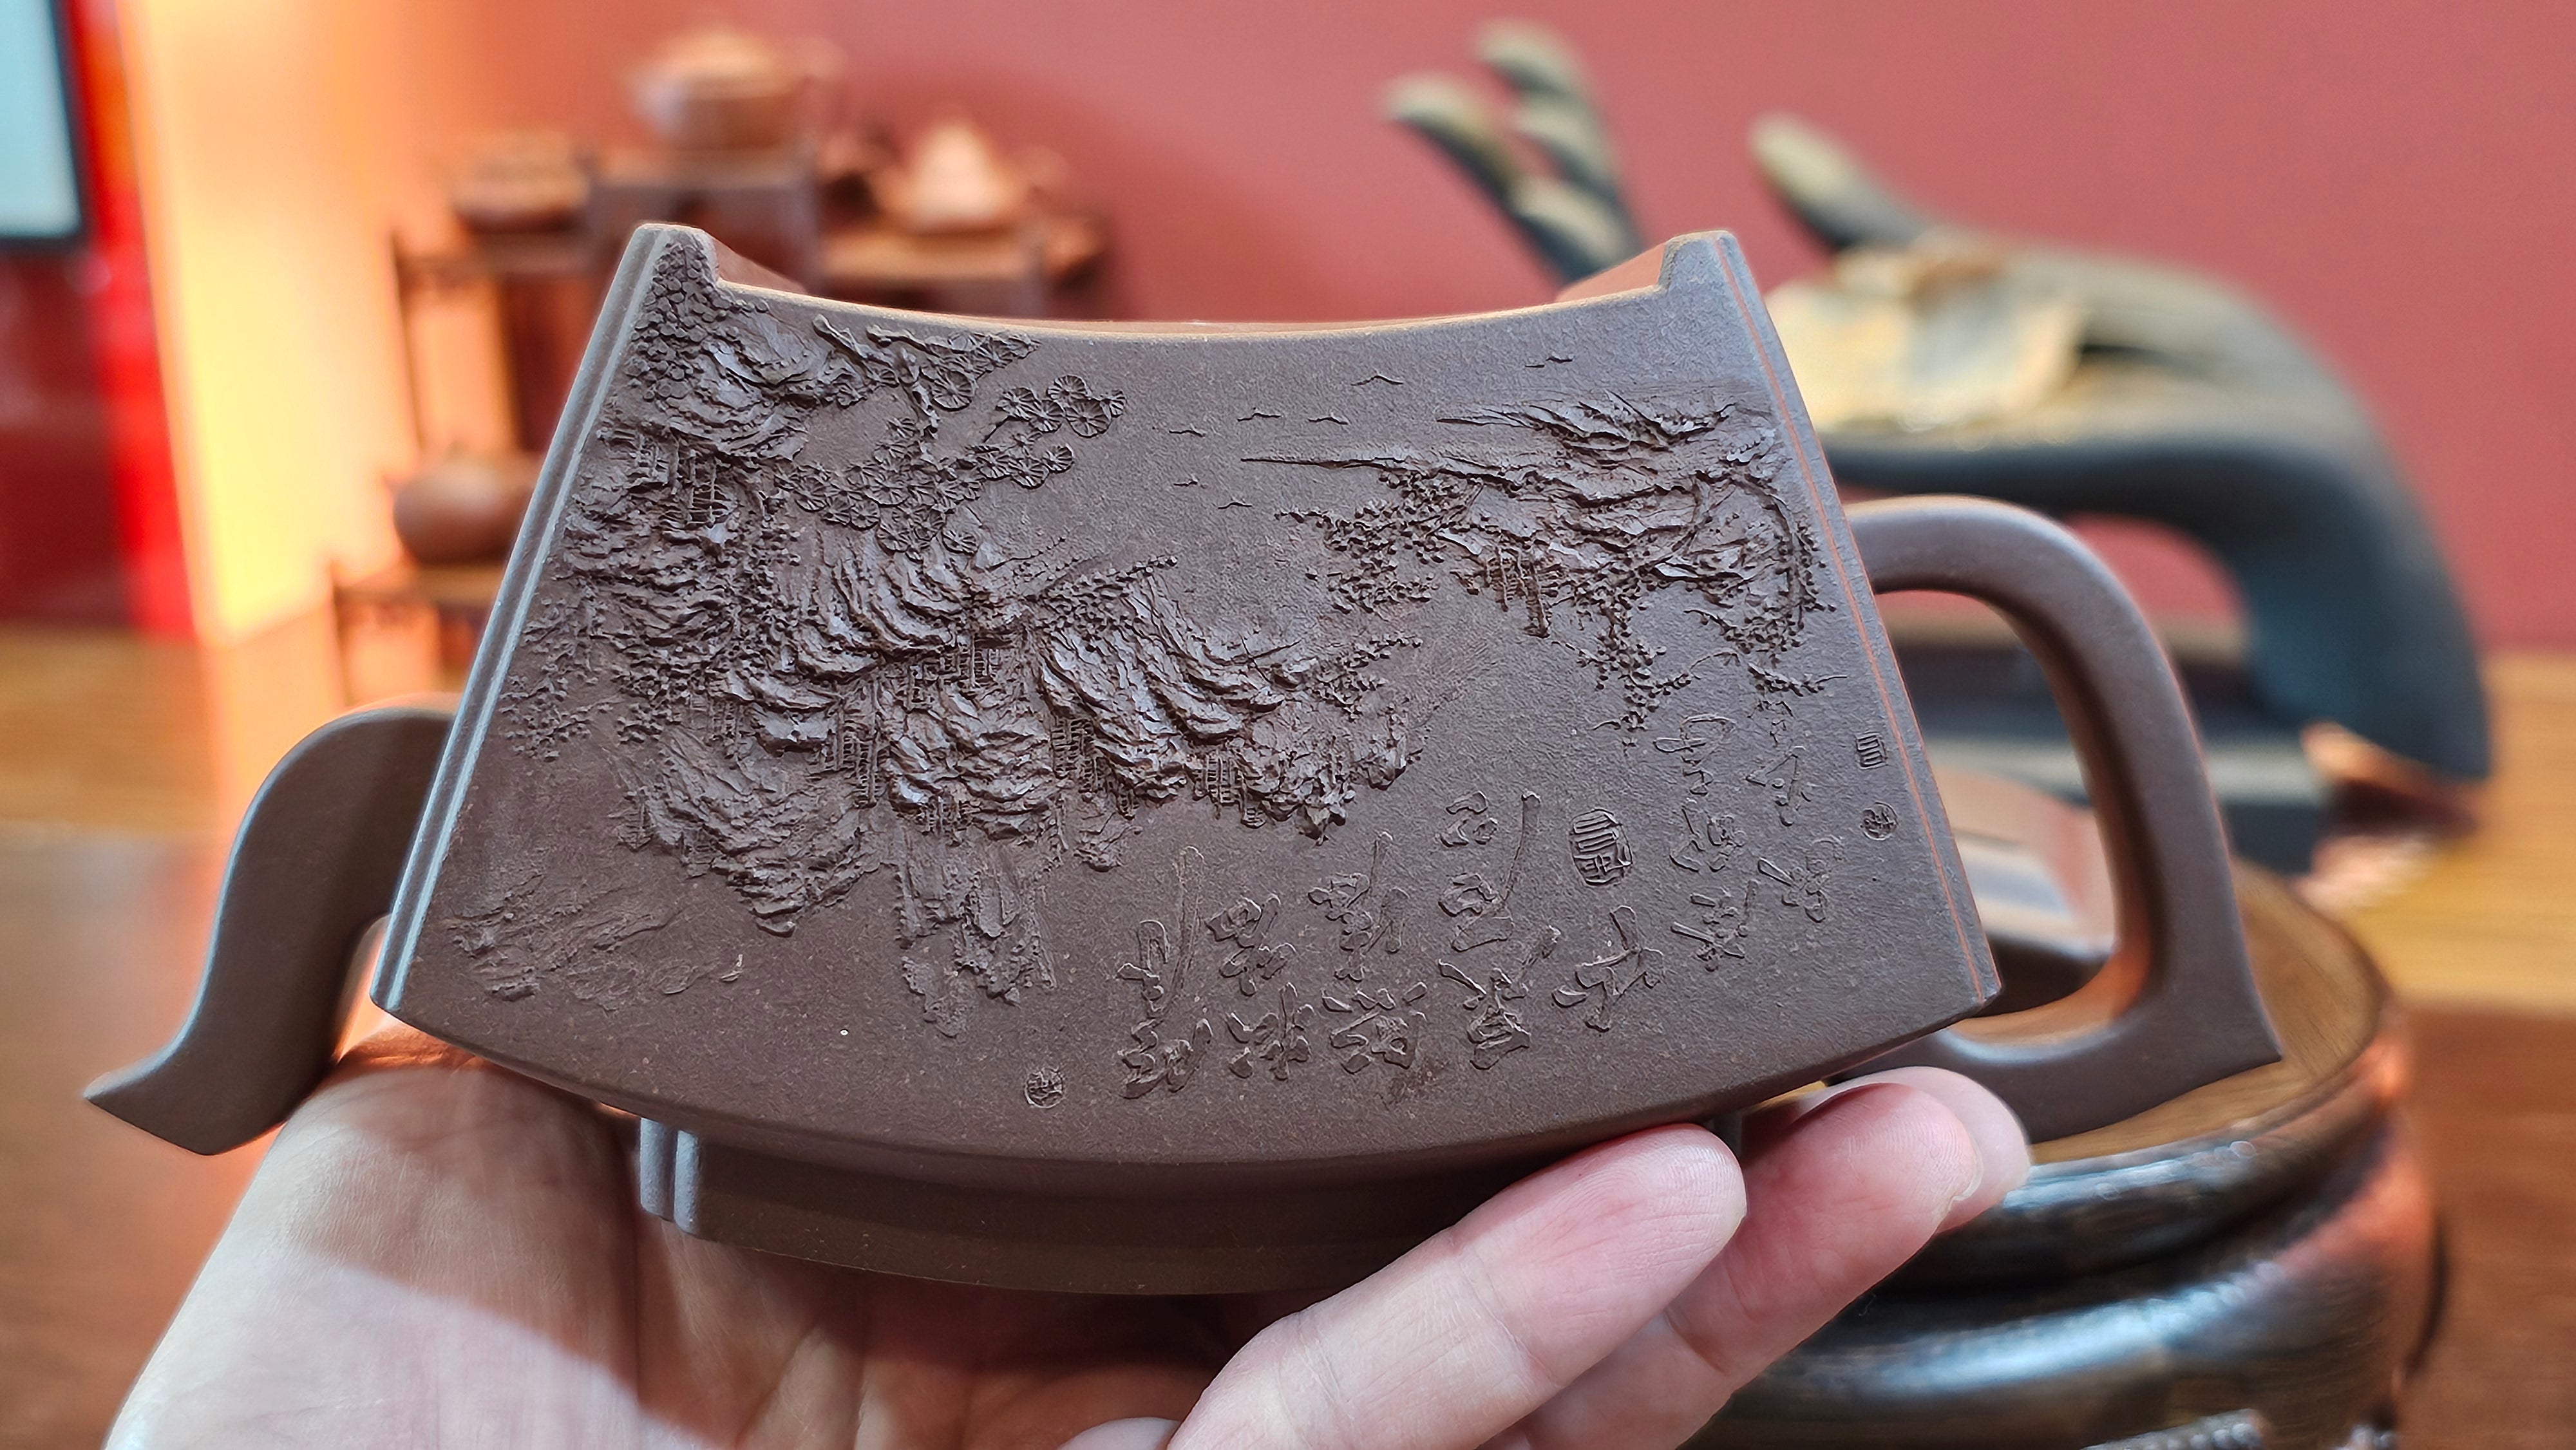 Ming Yuan Fan Configuration 鸣远扇形 by L2A Senior Consummate Master Artist Yuan Hui 高级振兴技艺师-袁辉, collaboration with Master 施昌 Shi Chang 泥绘 Clay Sculpting.  Single Color Clay Sculpted Version.  Special Commission by Ms S.Espitia from The U.S.